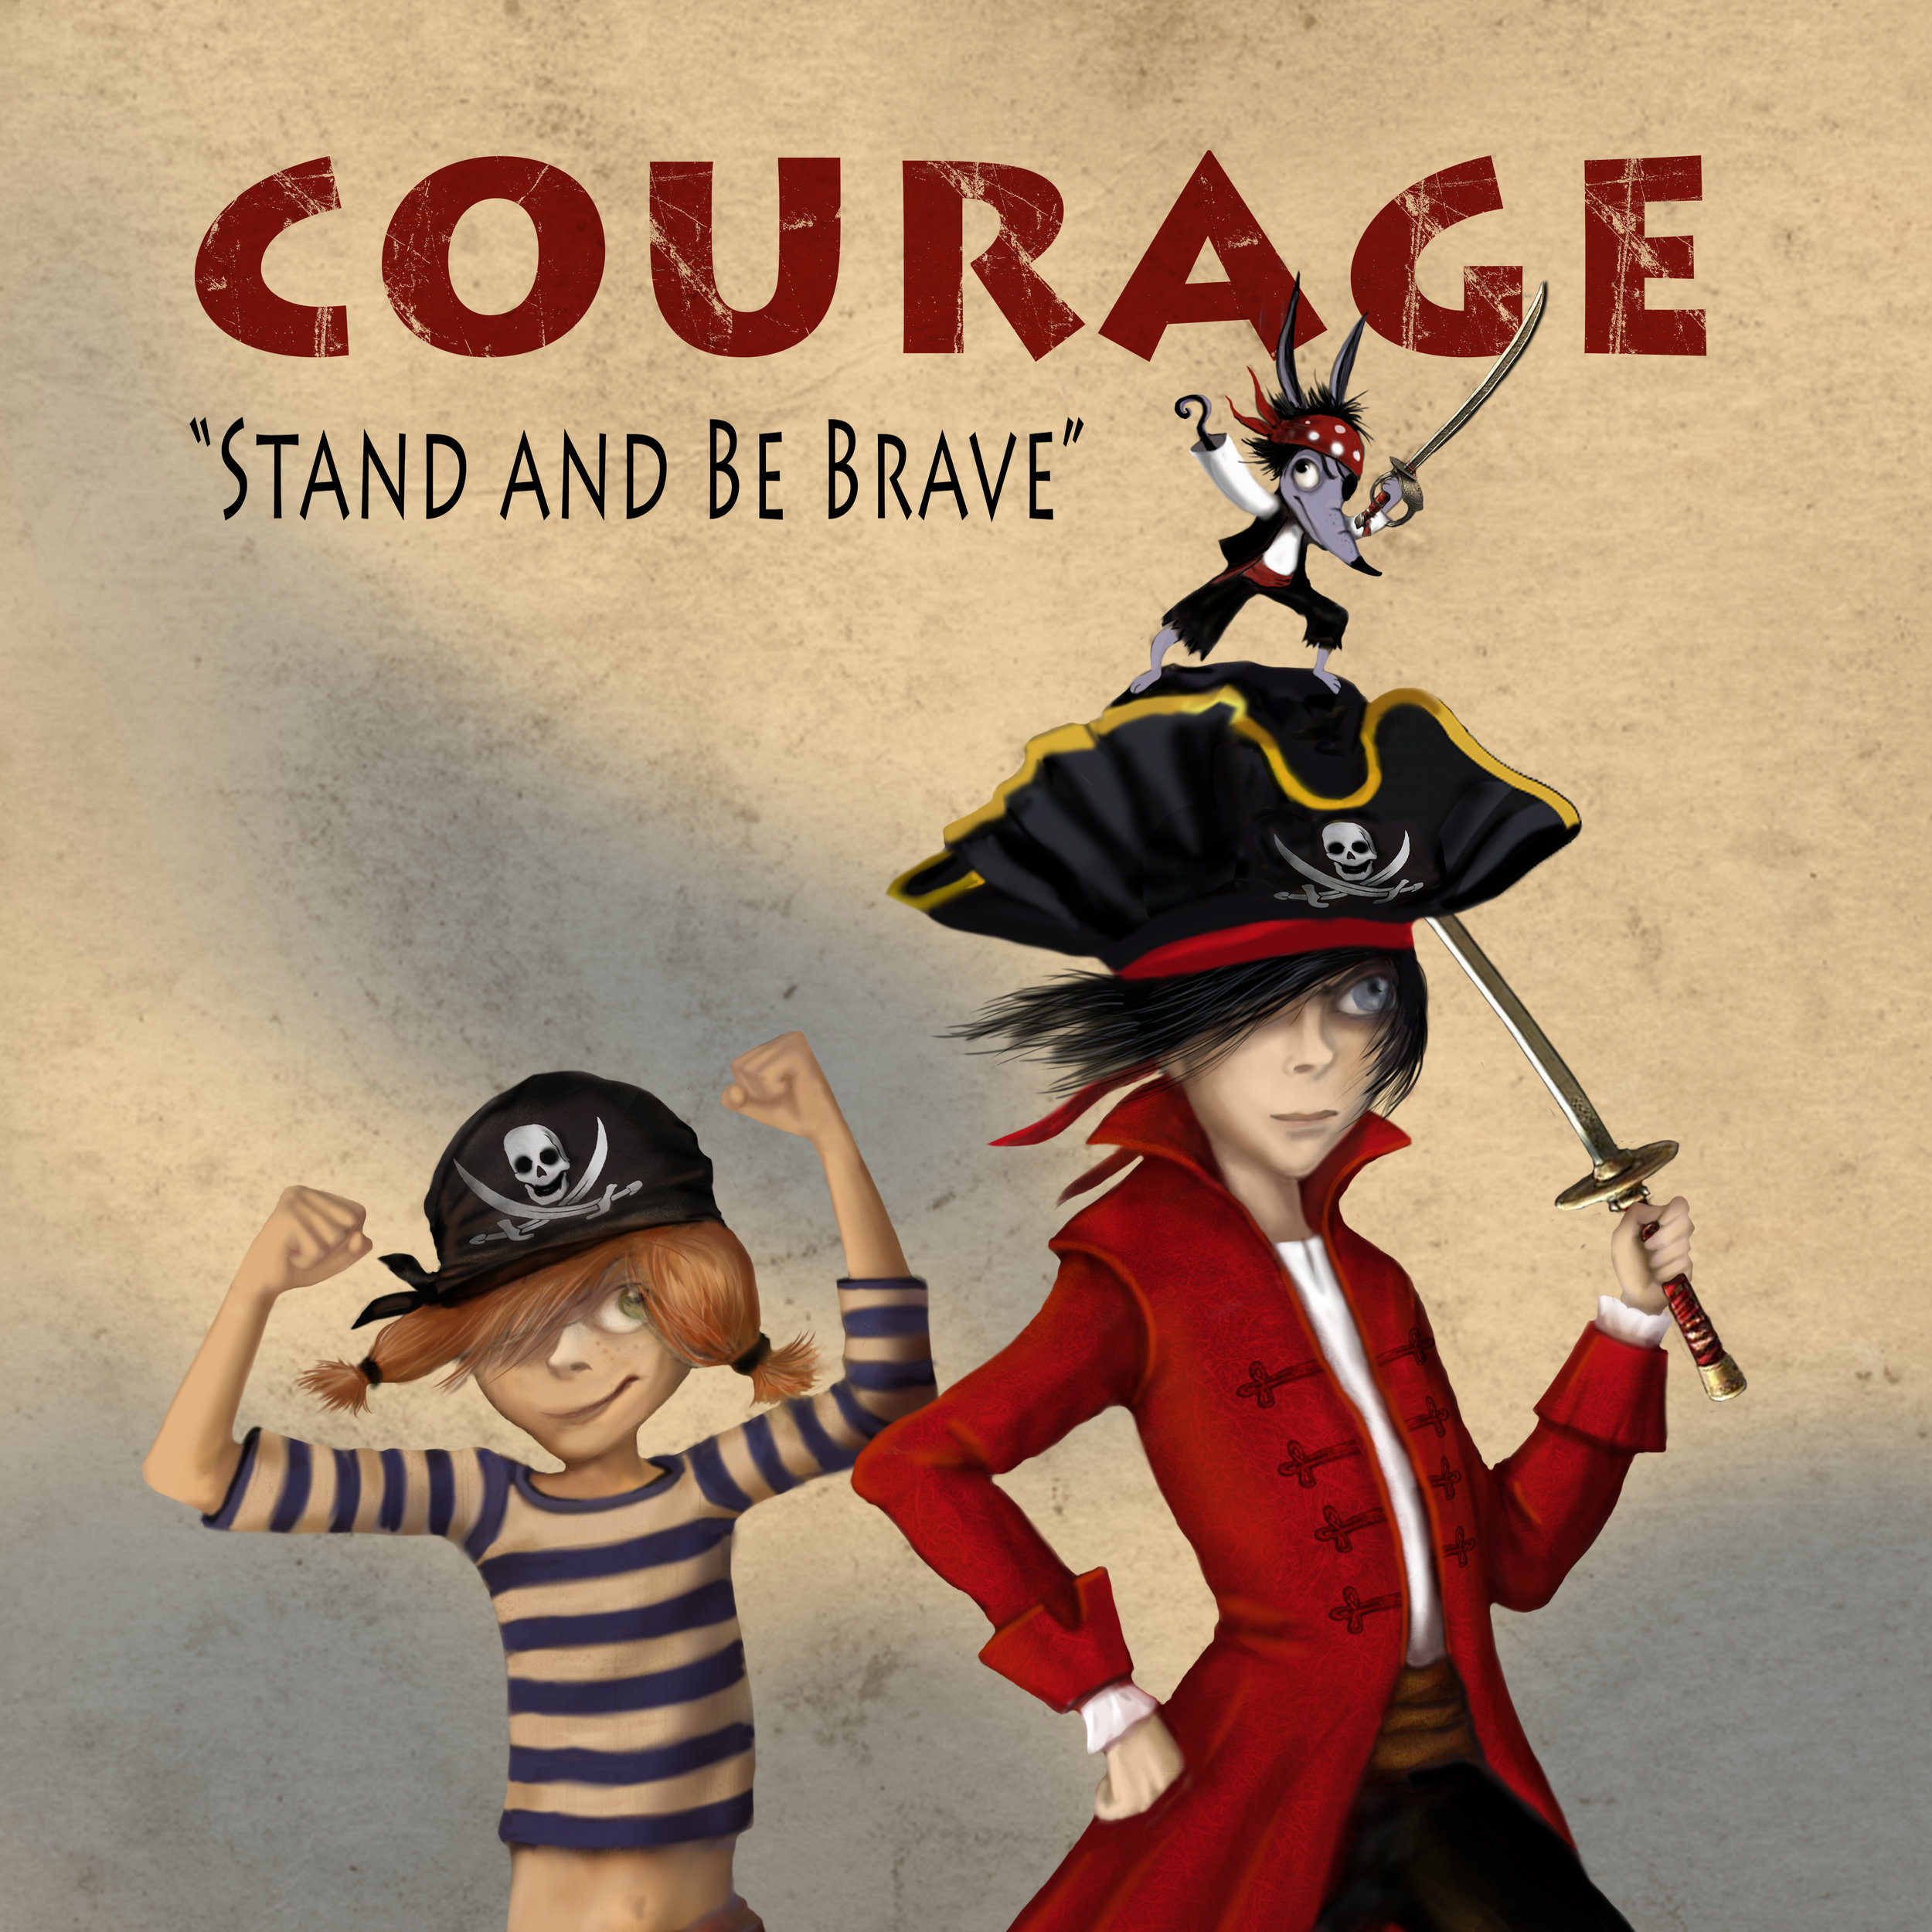 "Courage" by Danibelle, picture book cover, 2017